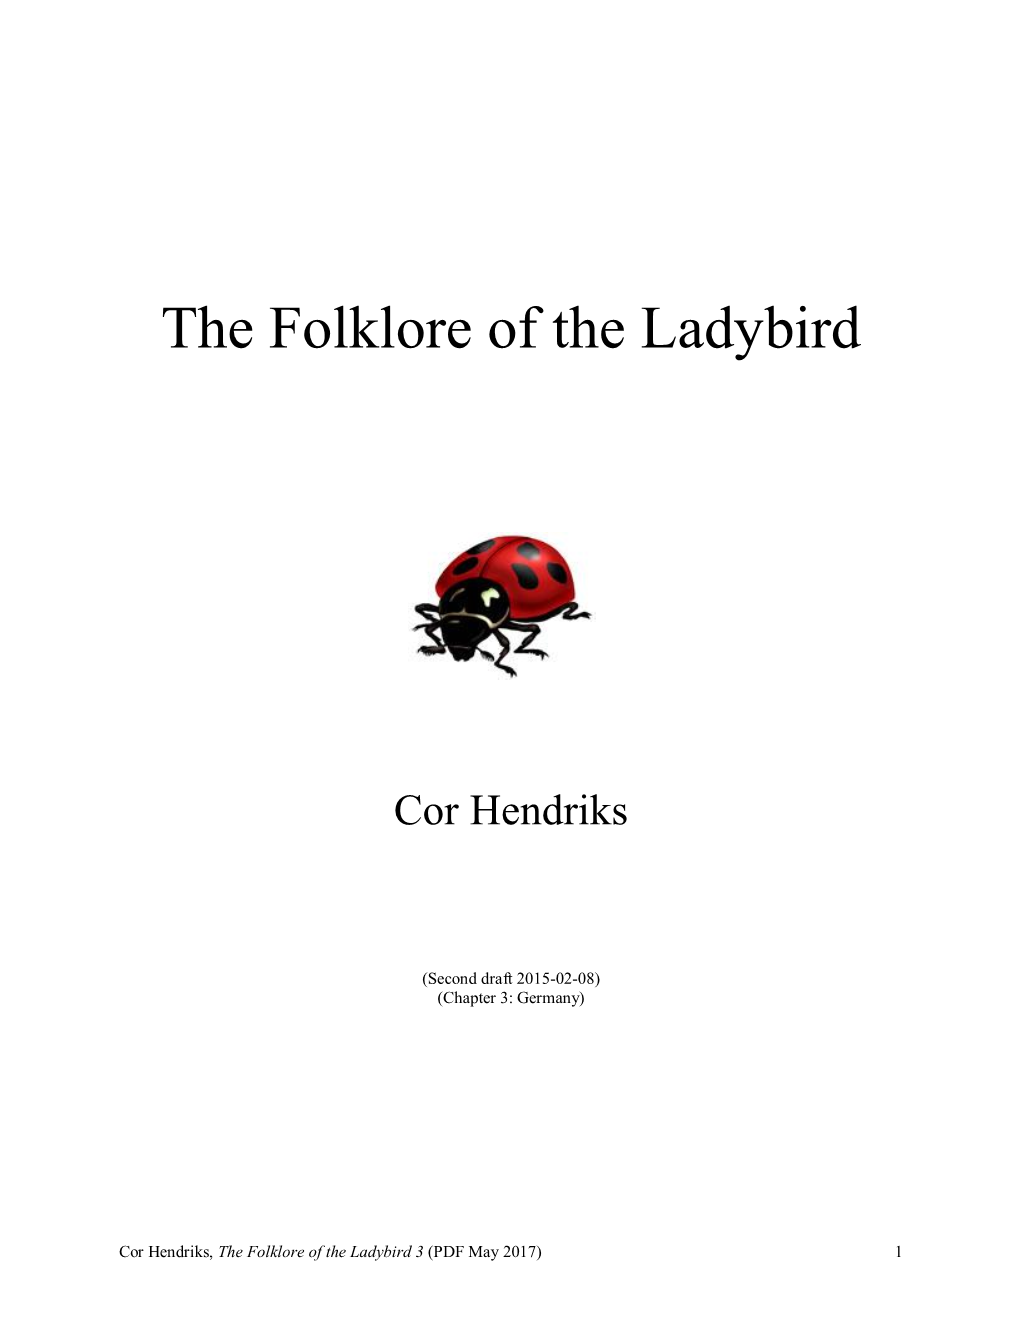 The Folklore of the Ladybird 3 (PDF May 2017) 1 Chapter 3